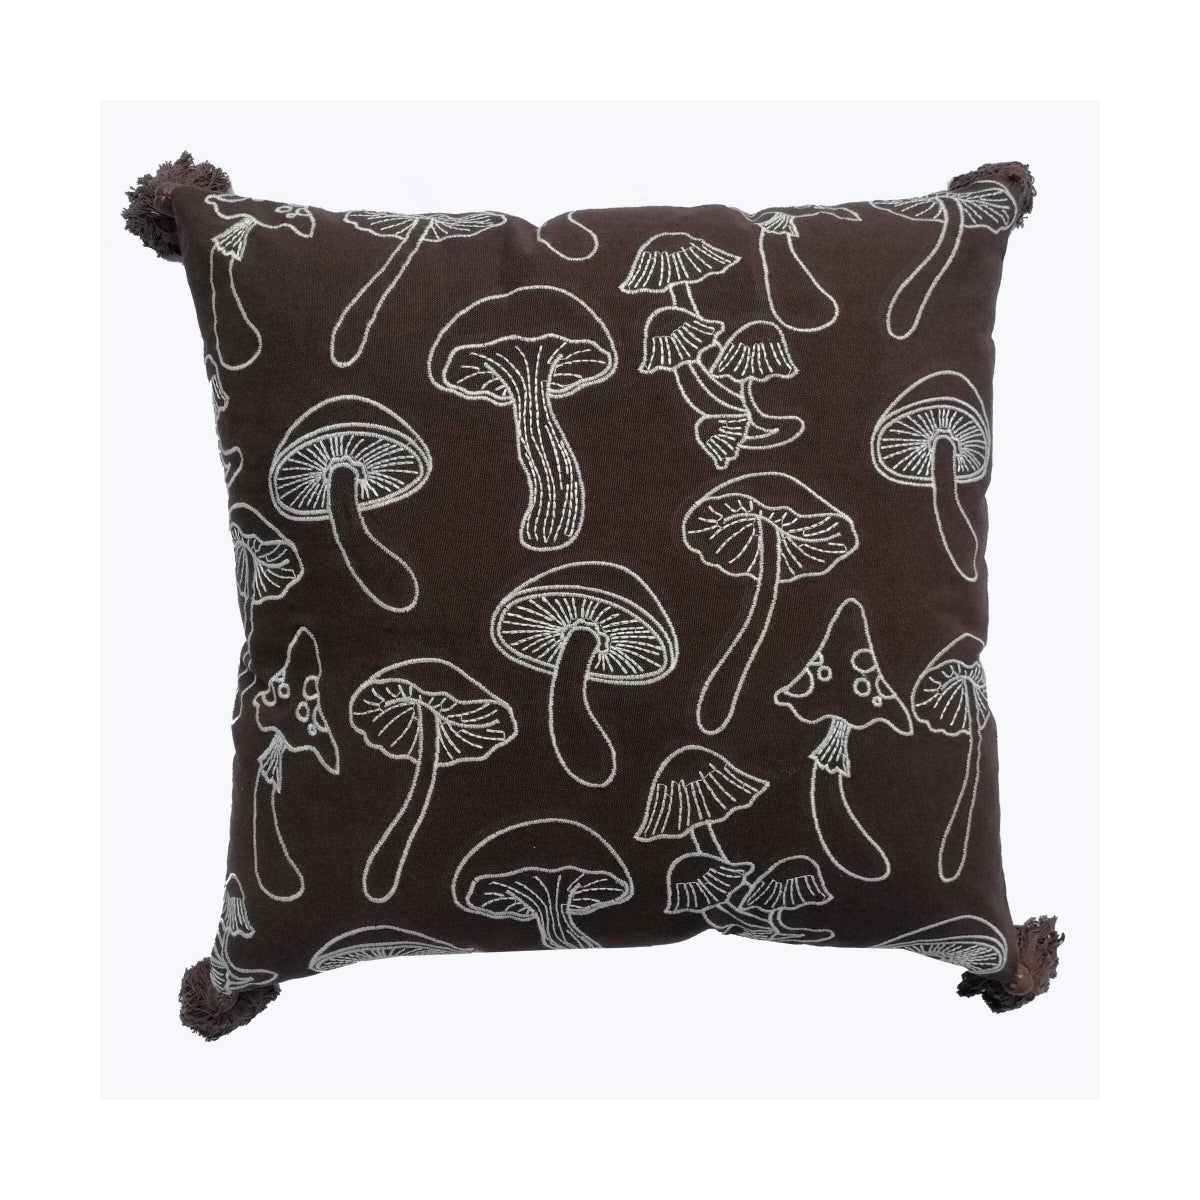 Cotton Square Pillow with Mushroom Pattern & Tassels